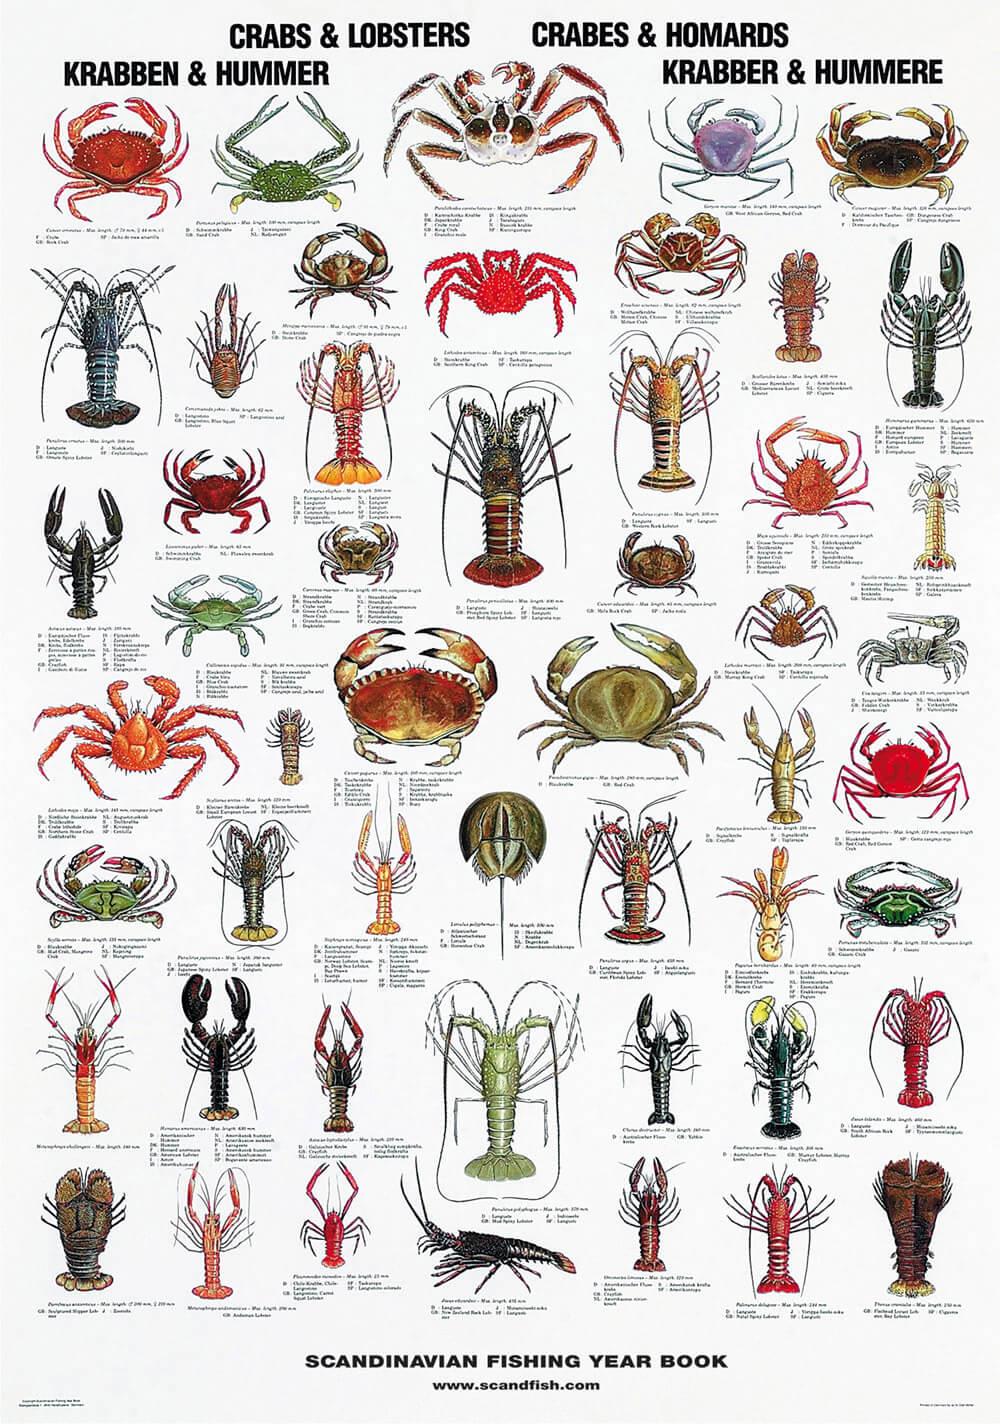 Buy Crab and Lobster Poster online here Linaa